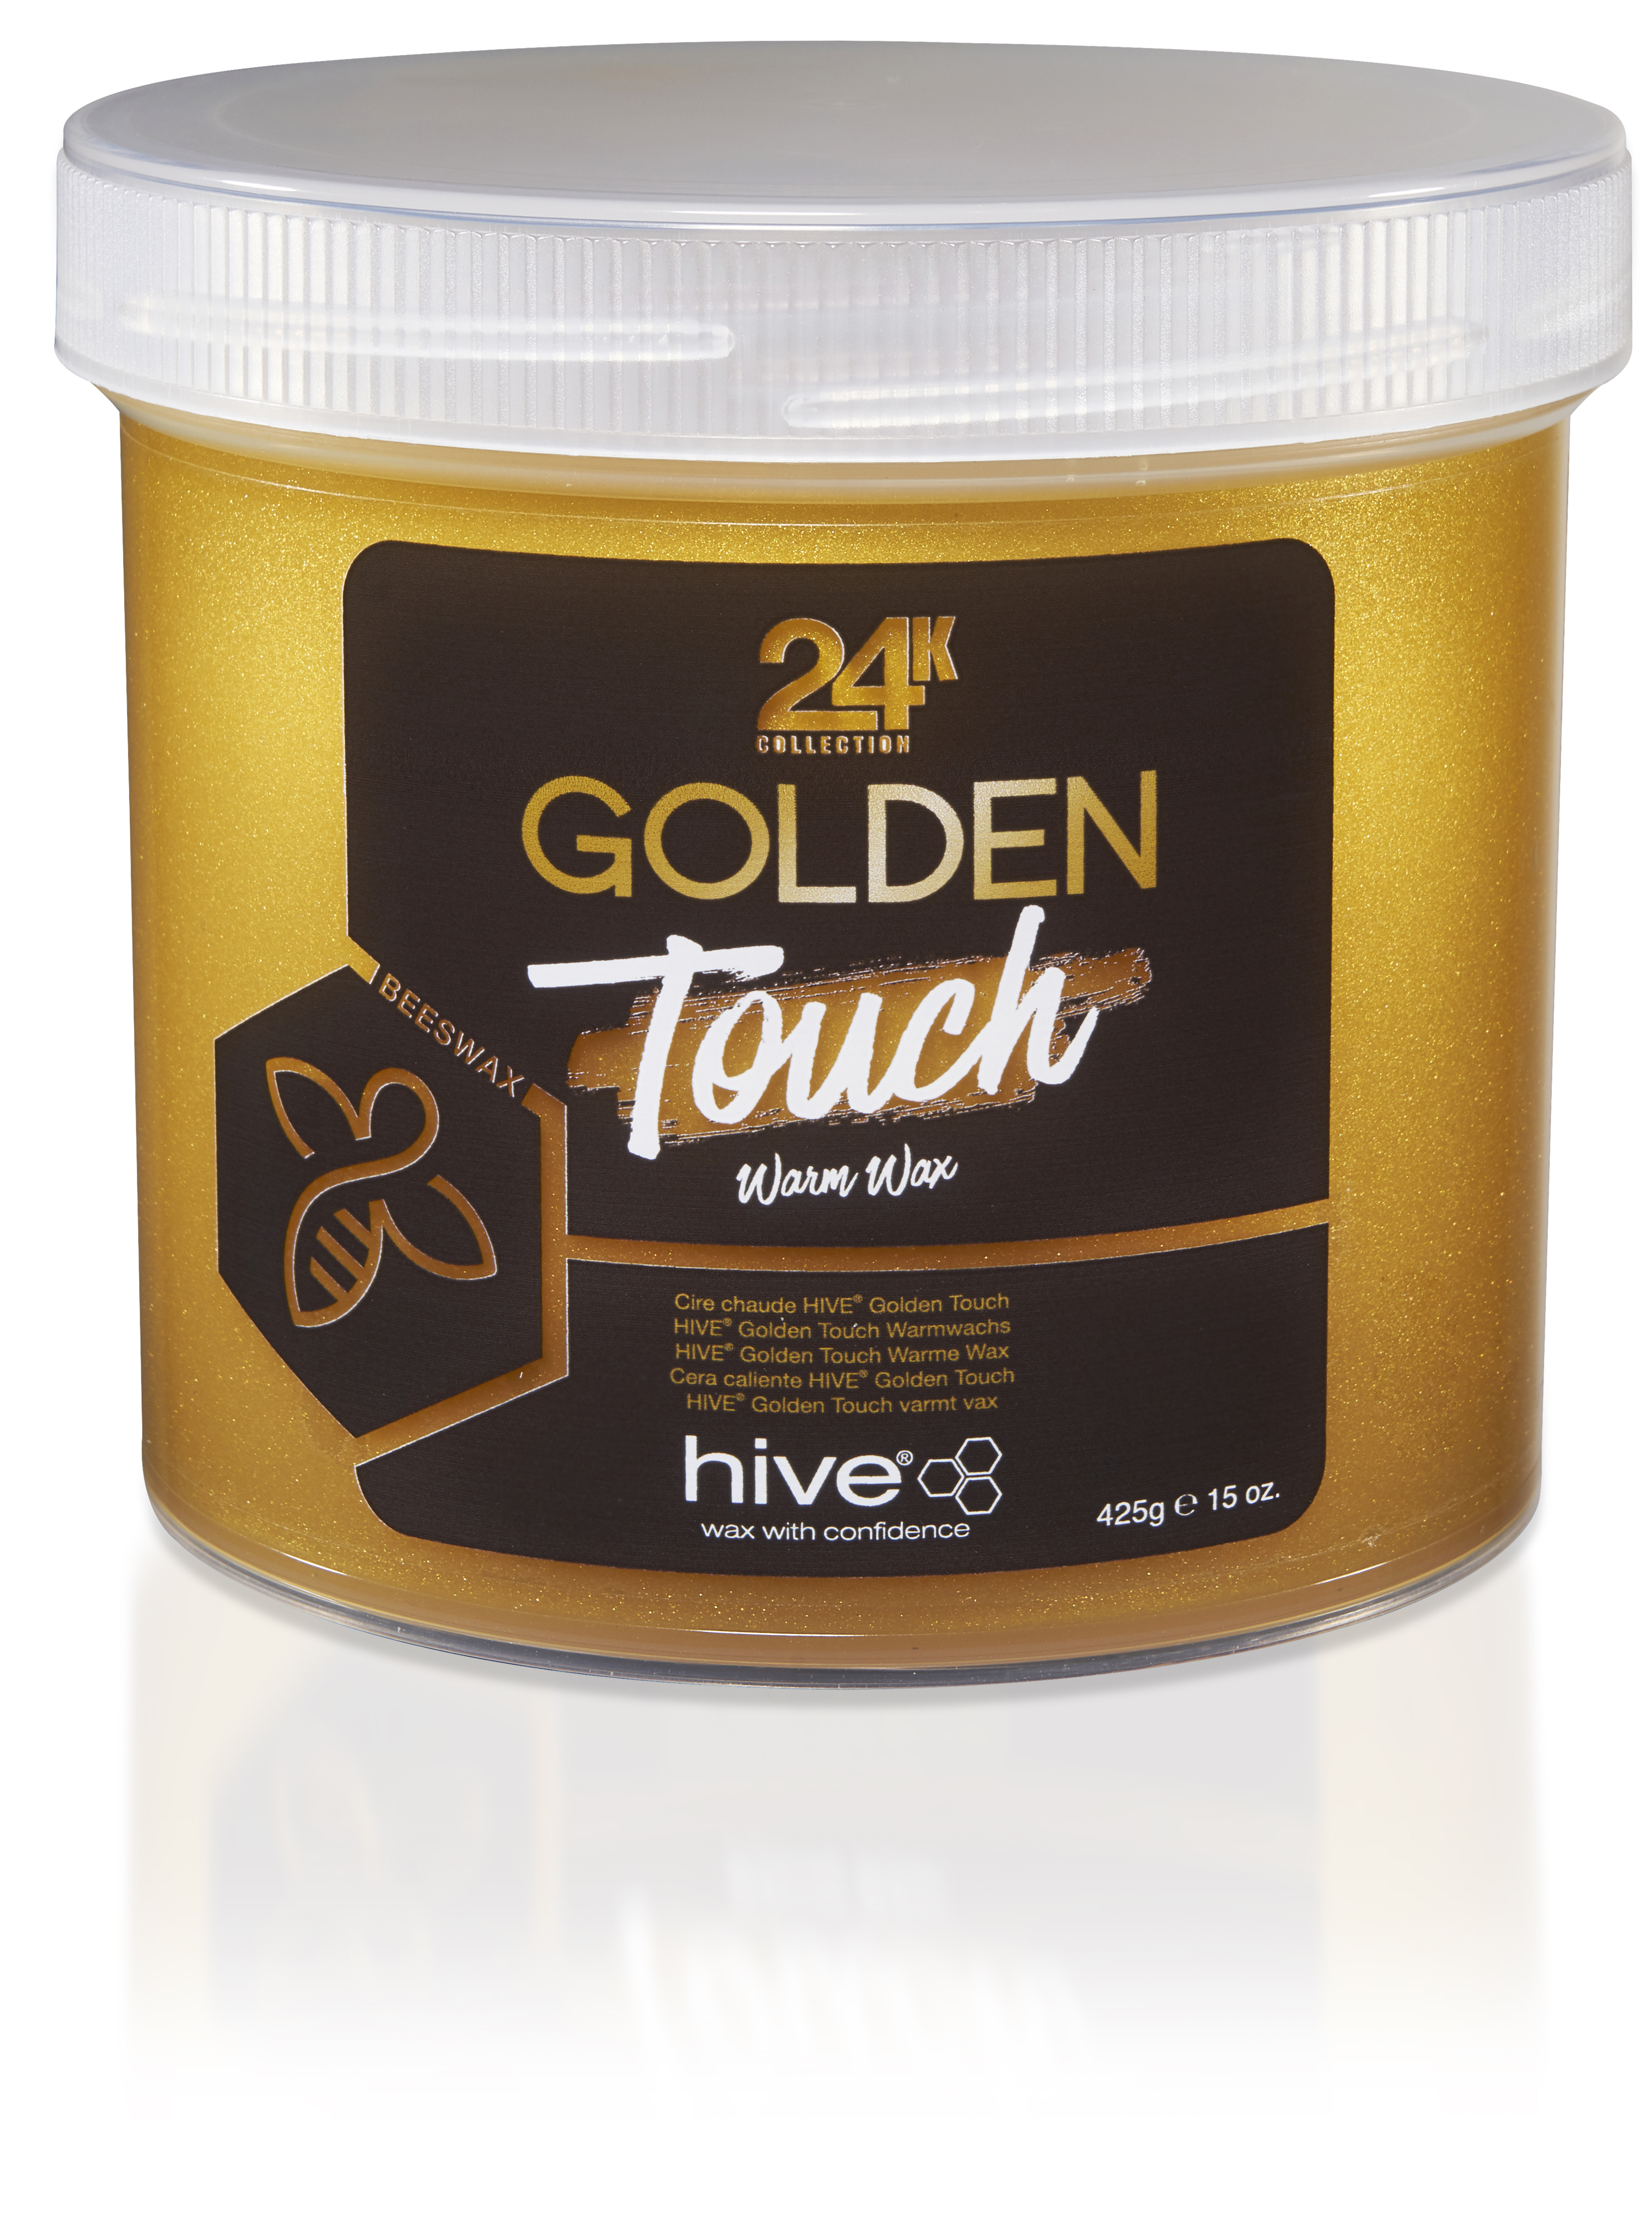 Hive Golden Touch warm wax